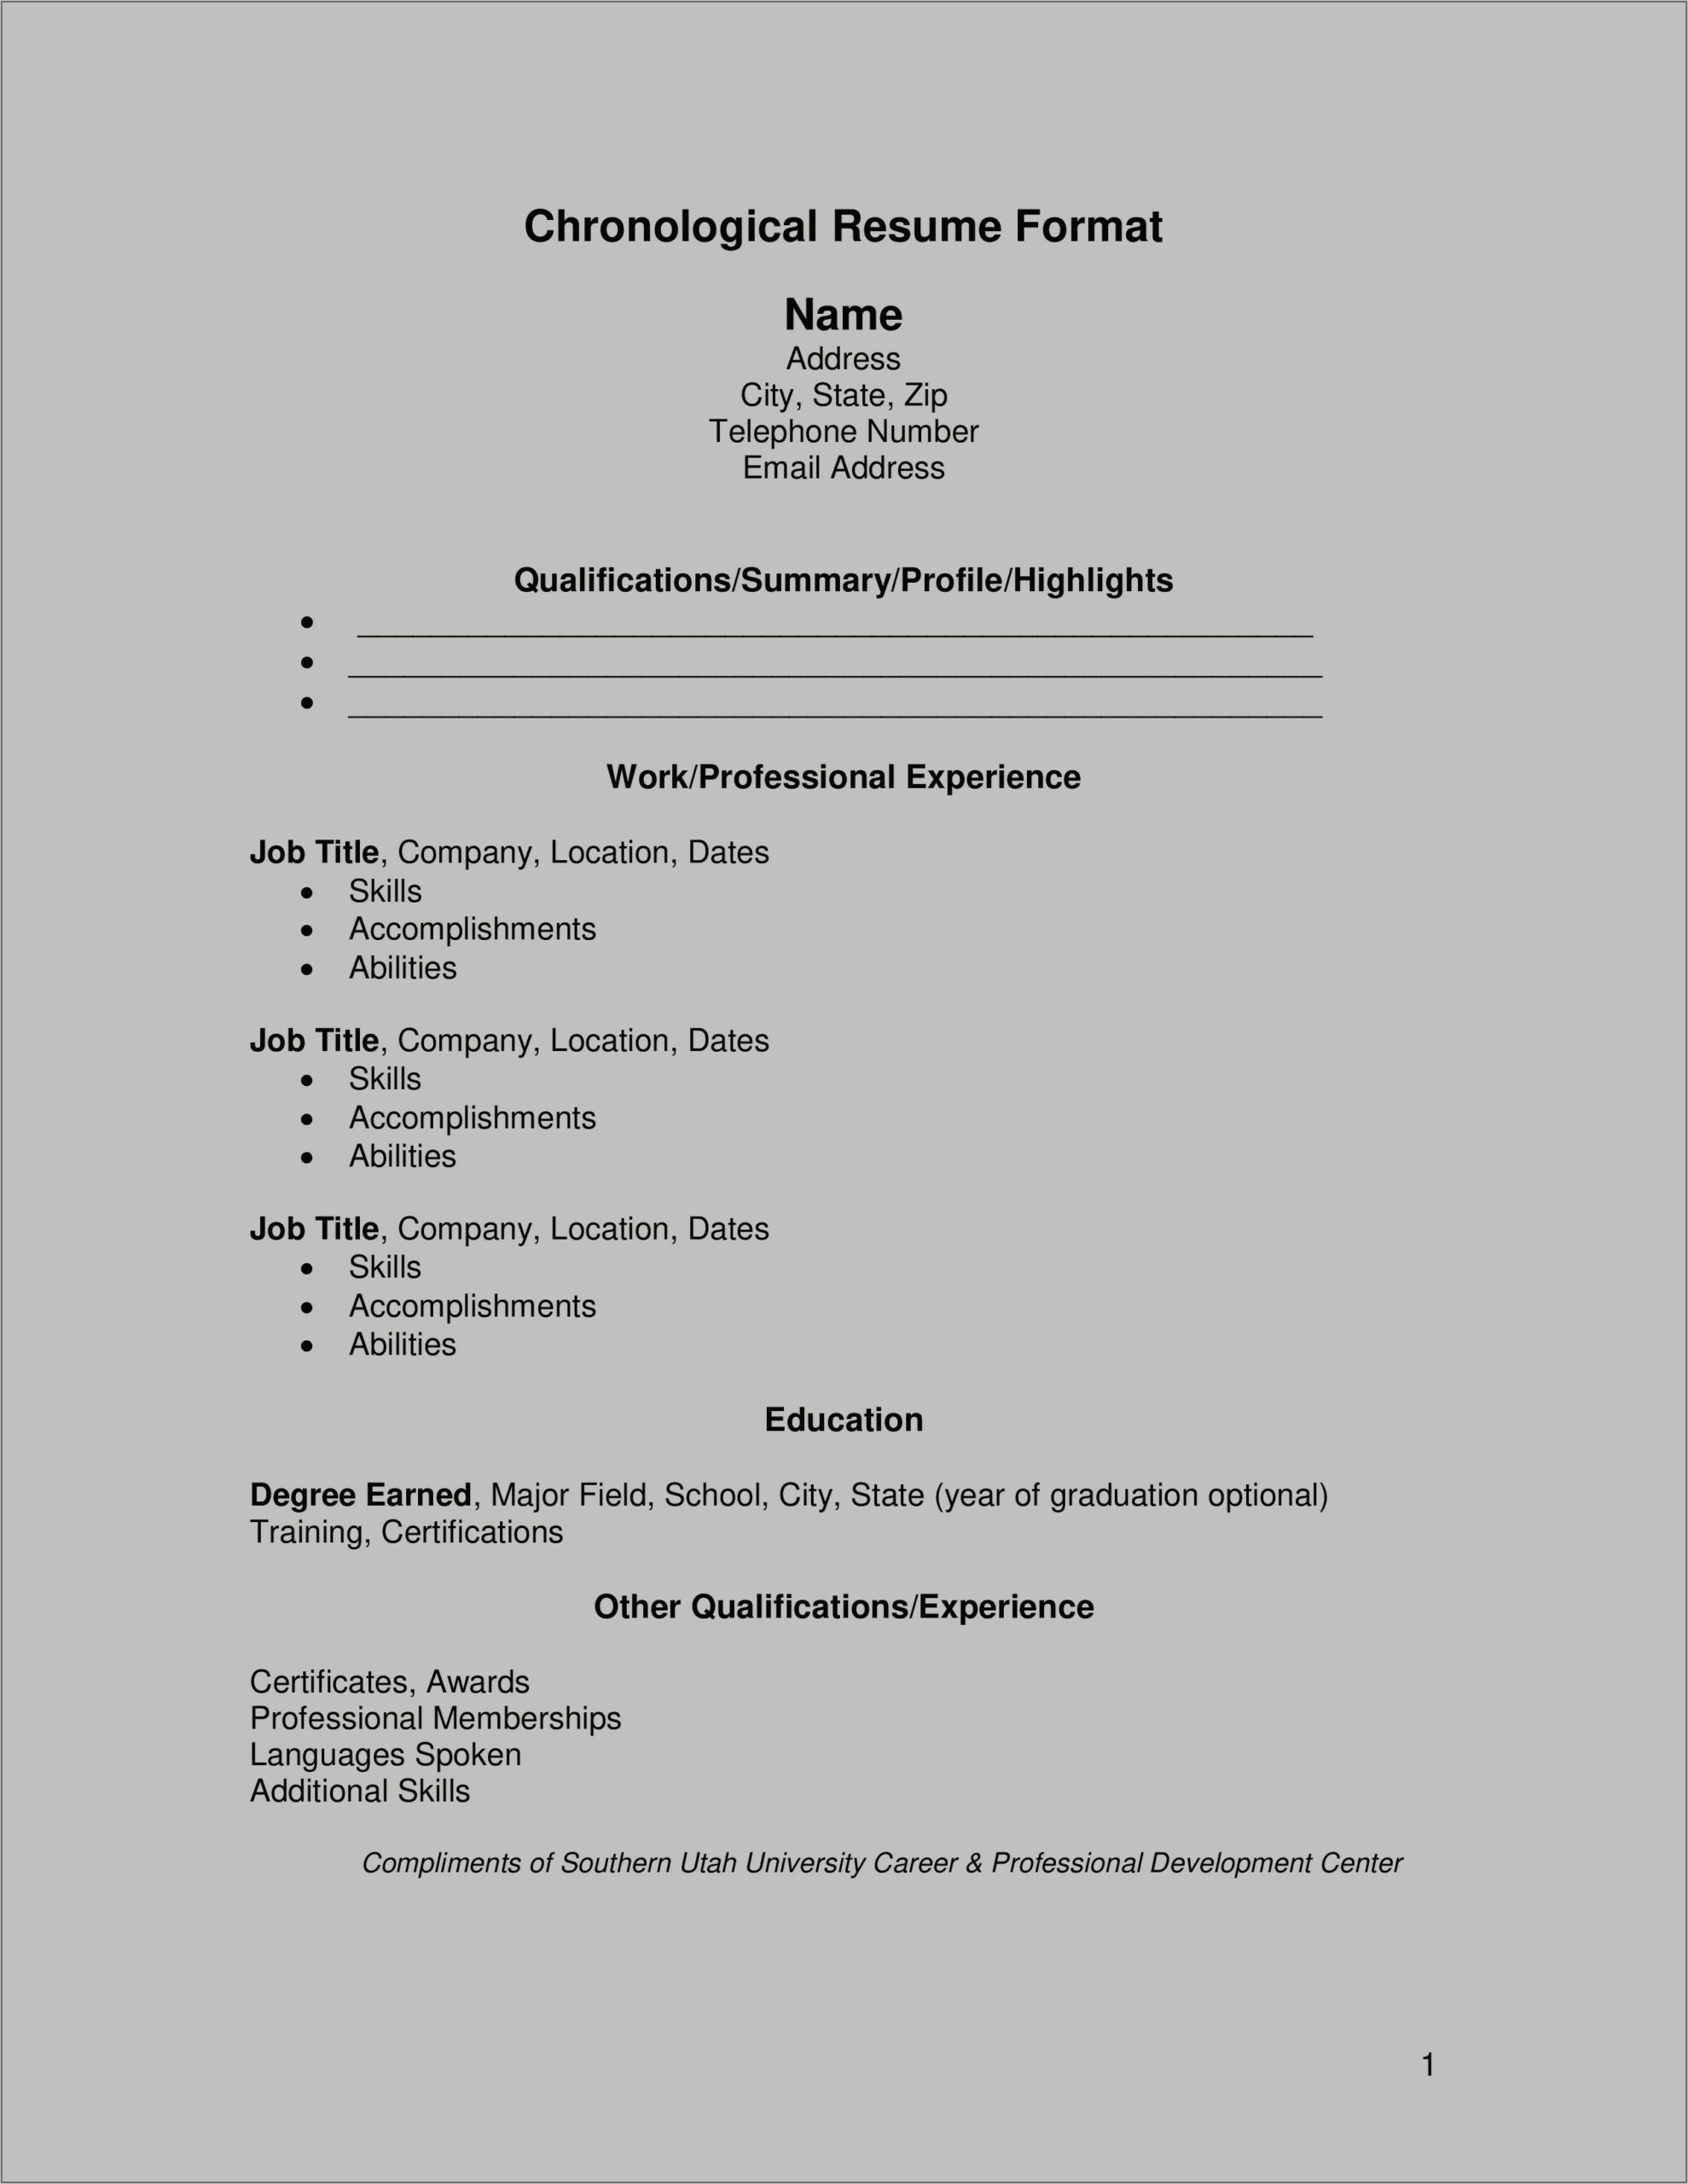 Professional Strengths And Skills For Resumes